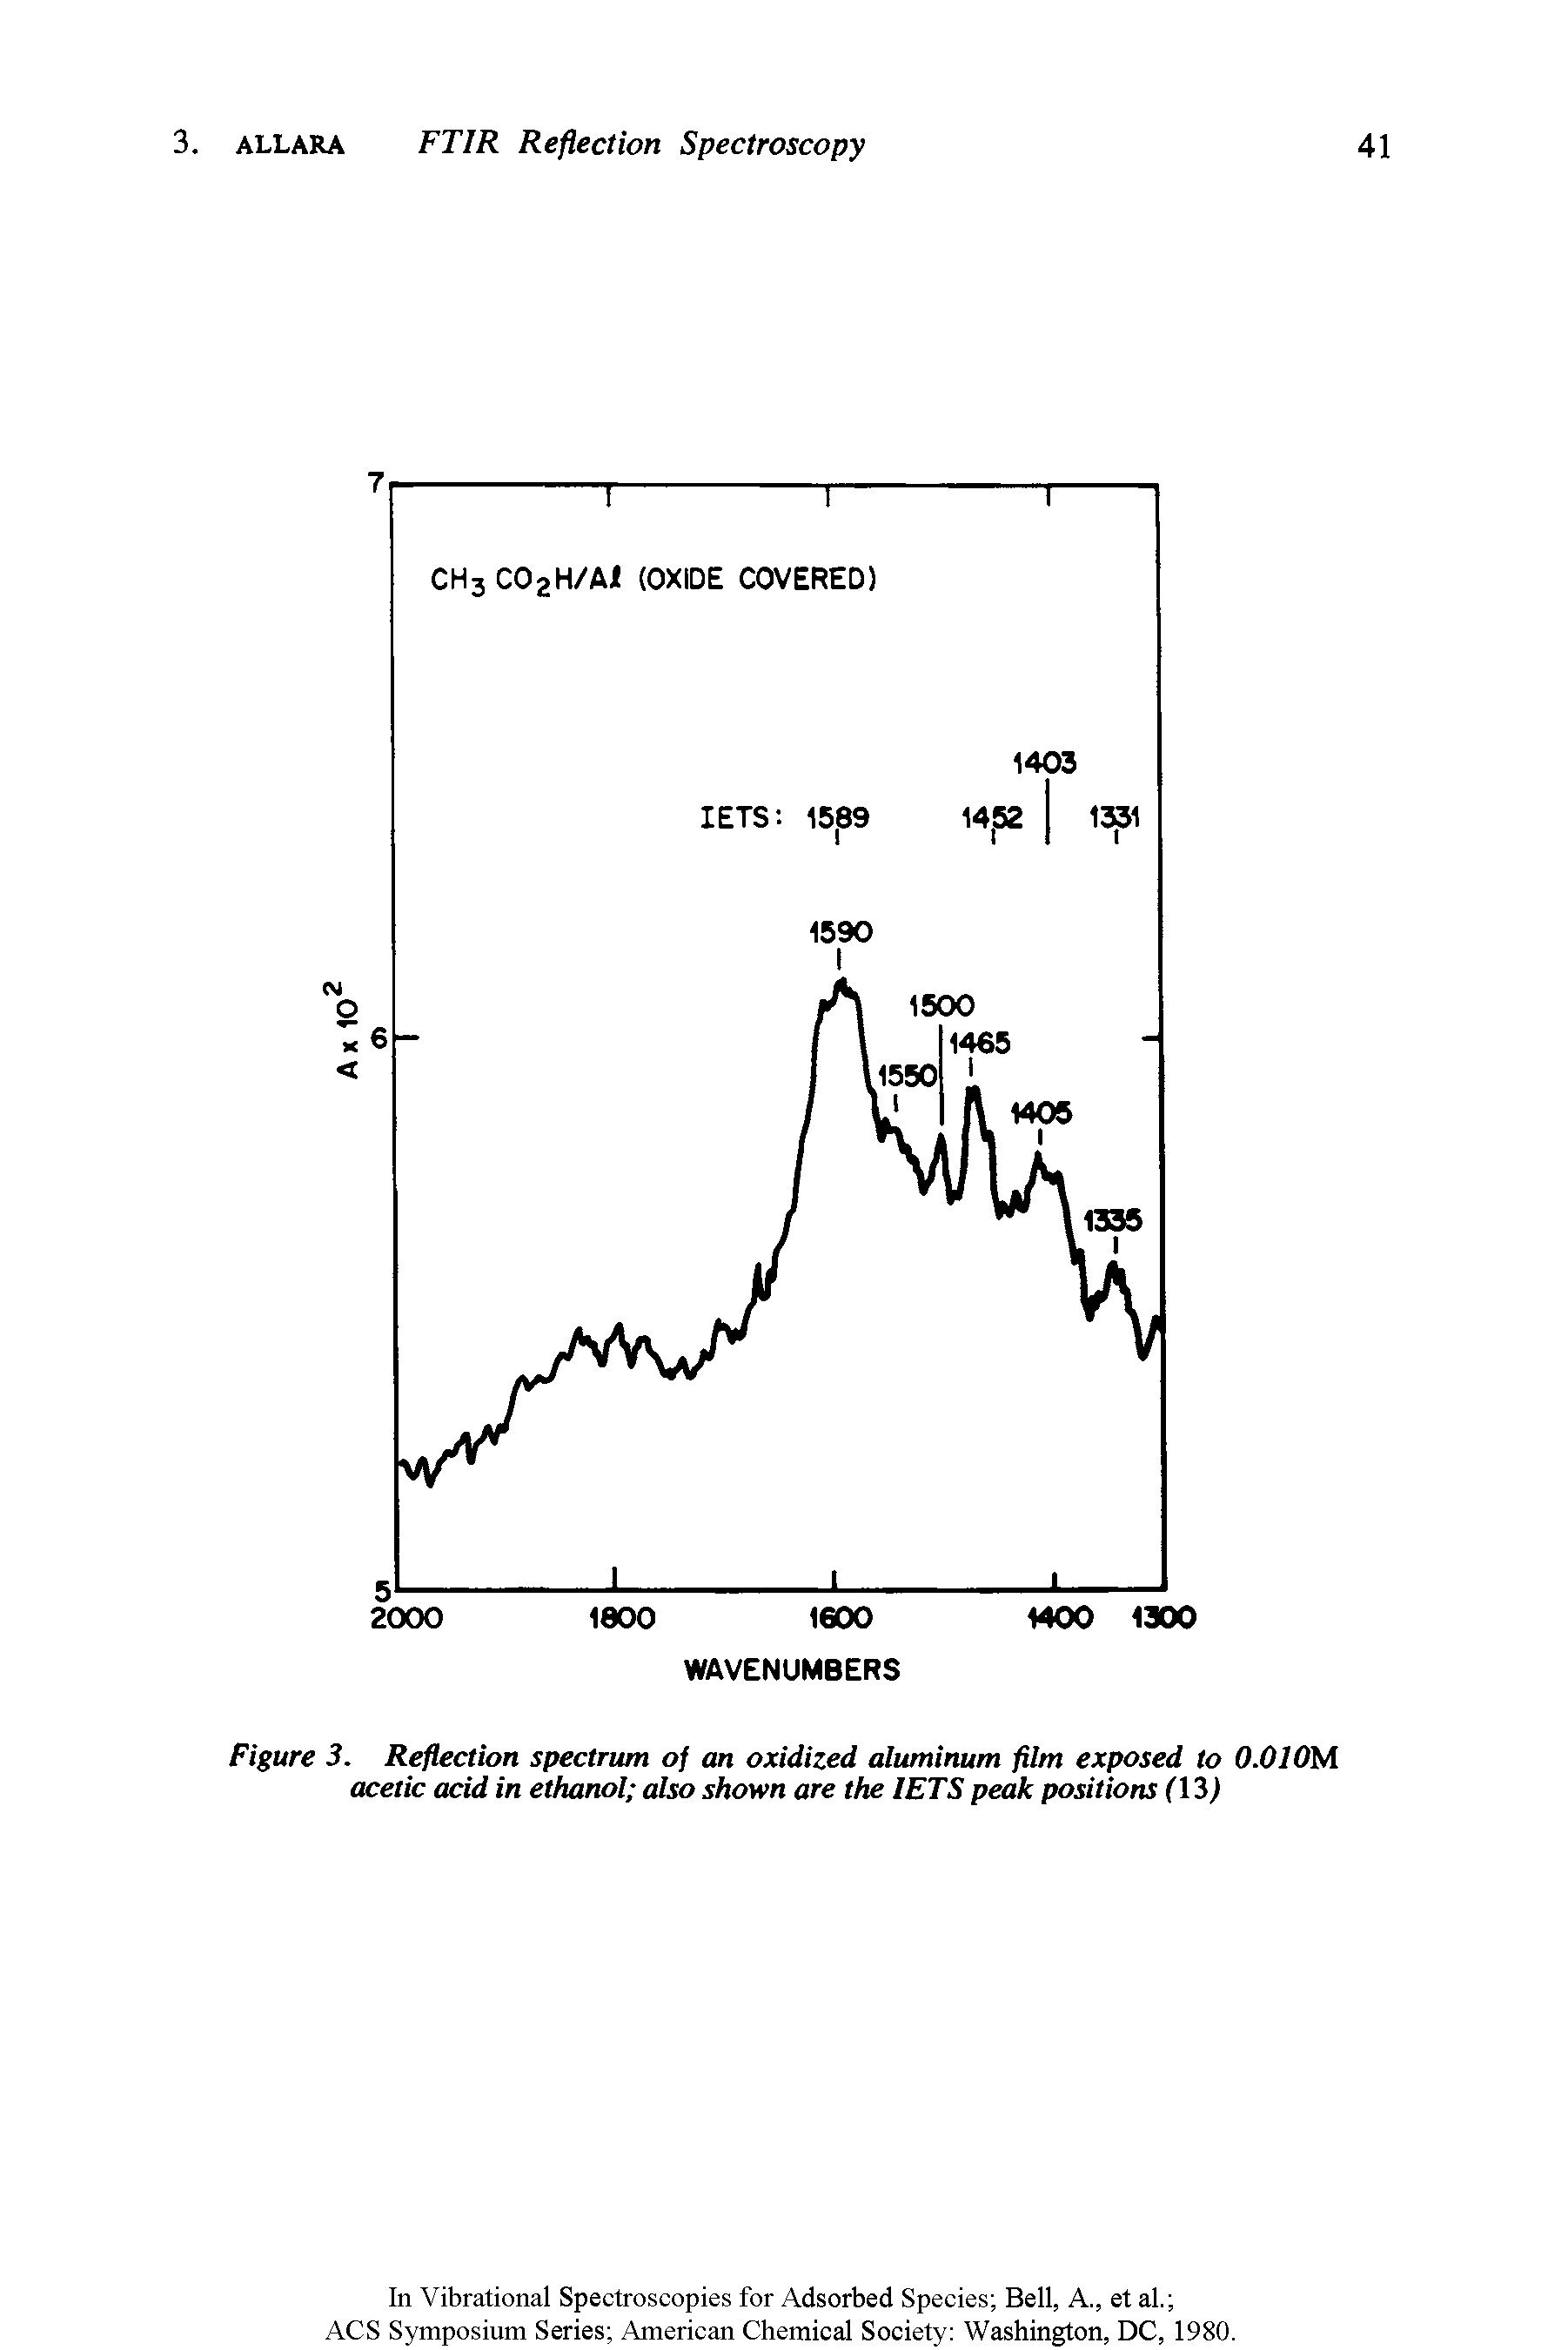 Figure 3. Reflection spectrum of an oxidized aluminum film exposed to 0.010M acetic acid in ethanol also shown are the 1ETS peak positions (13)...